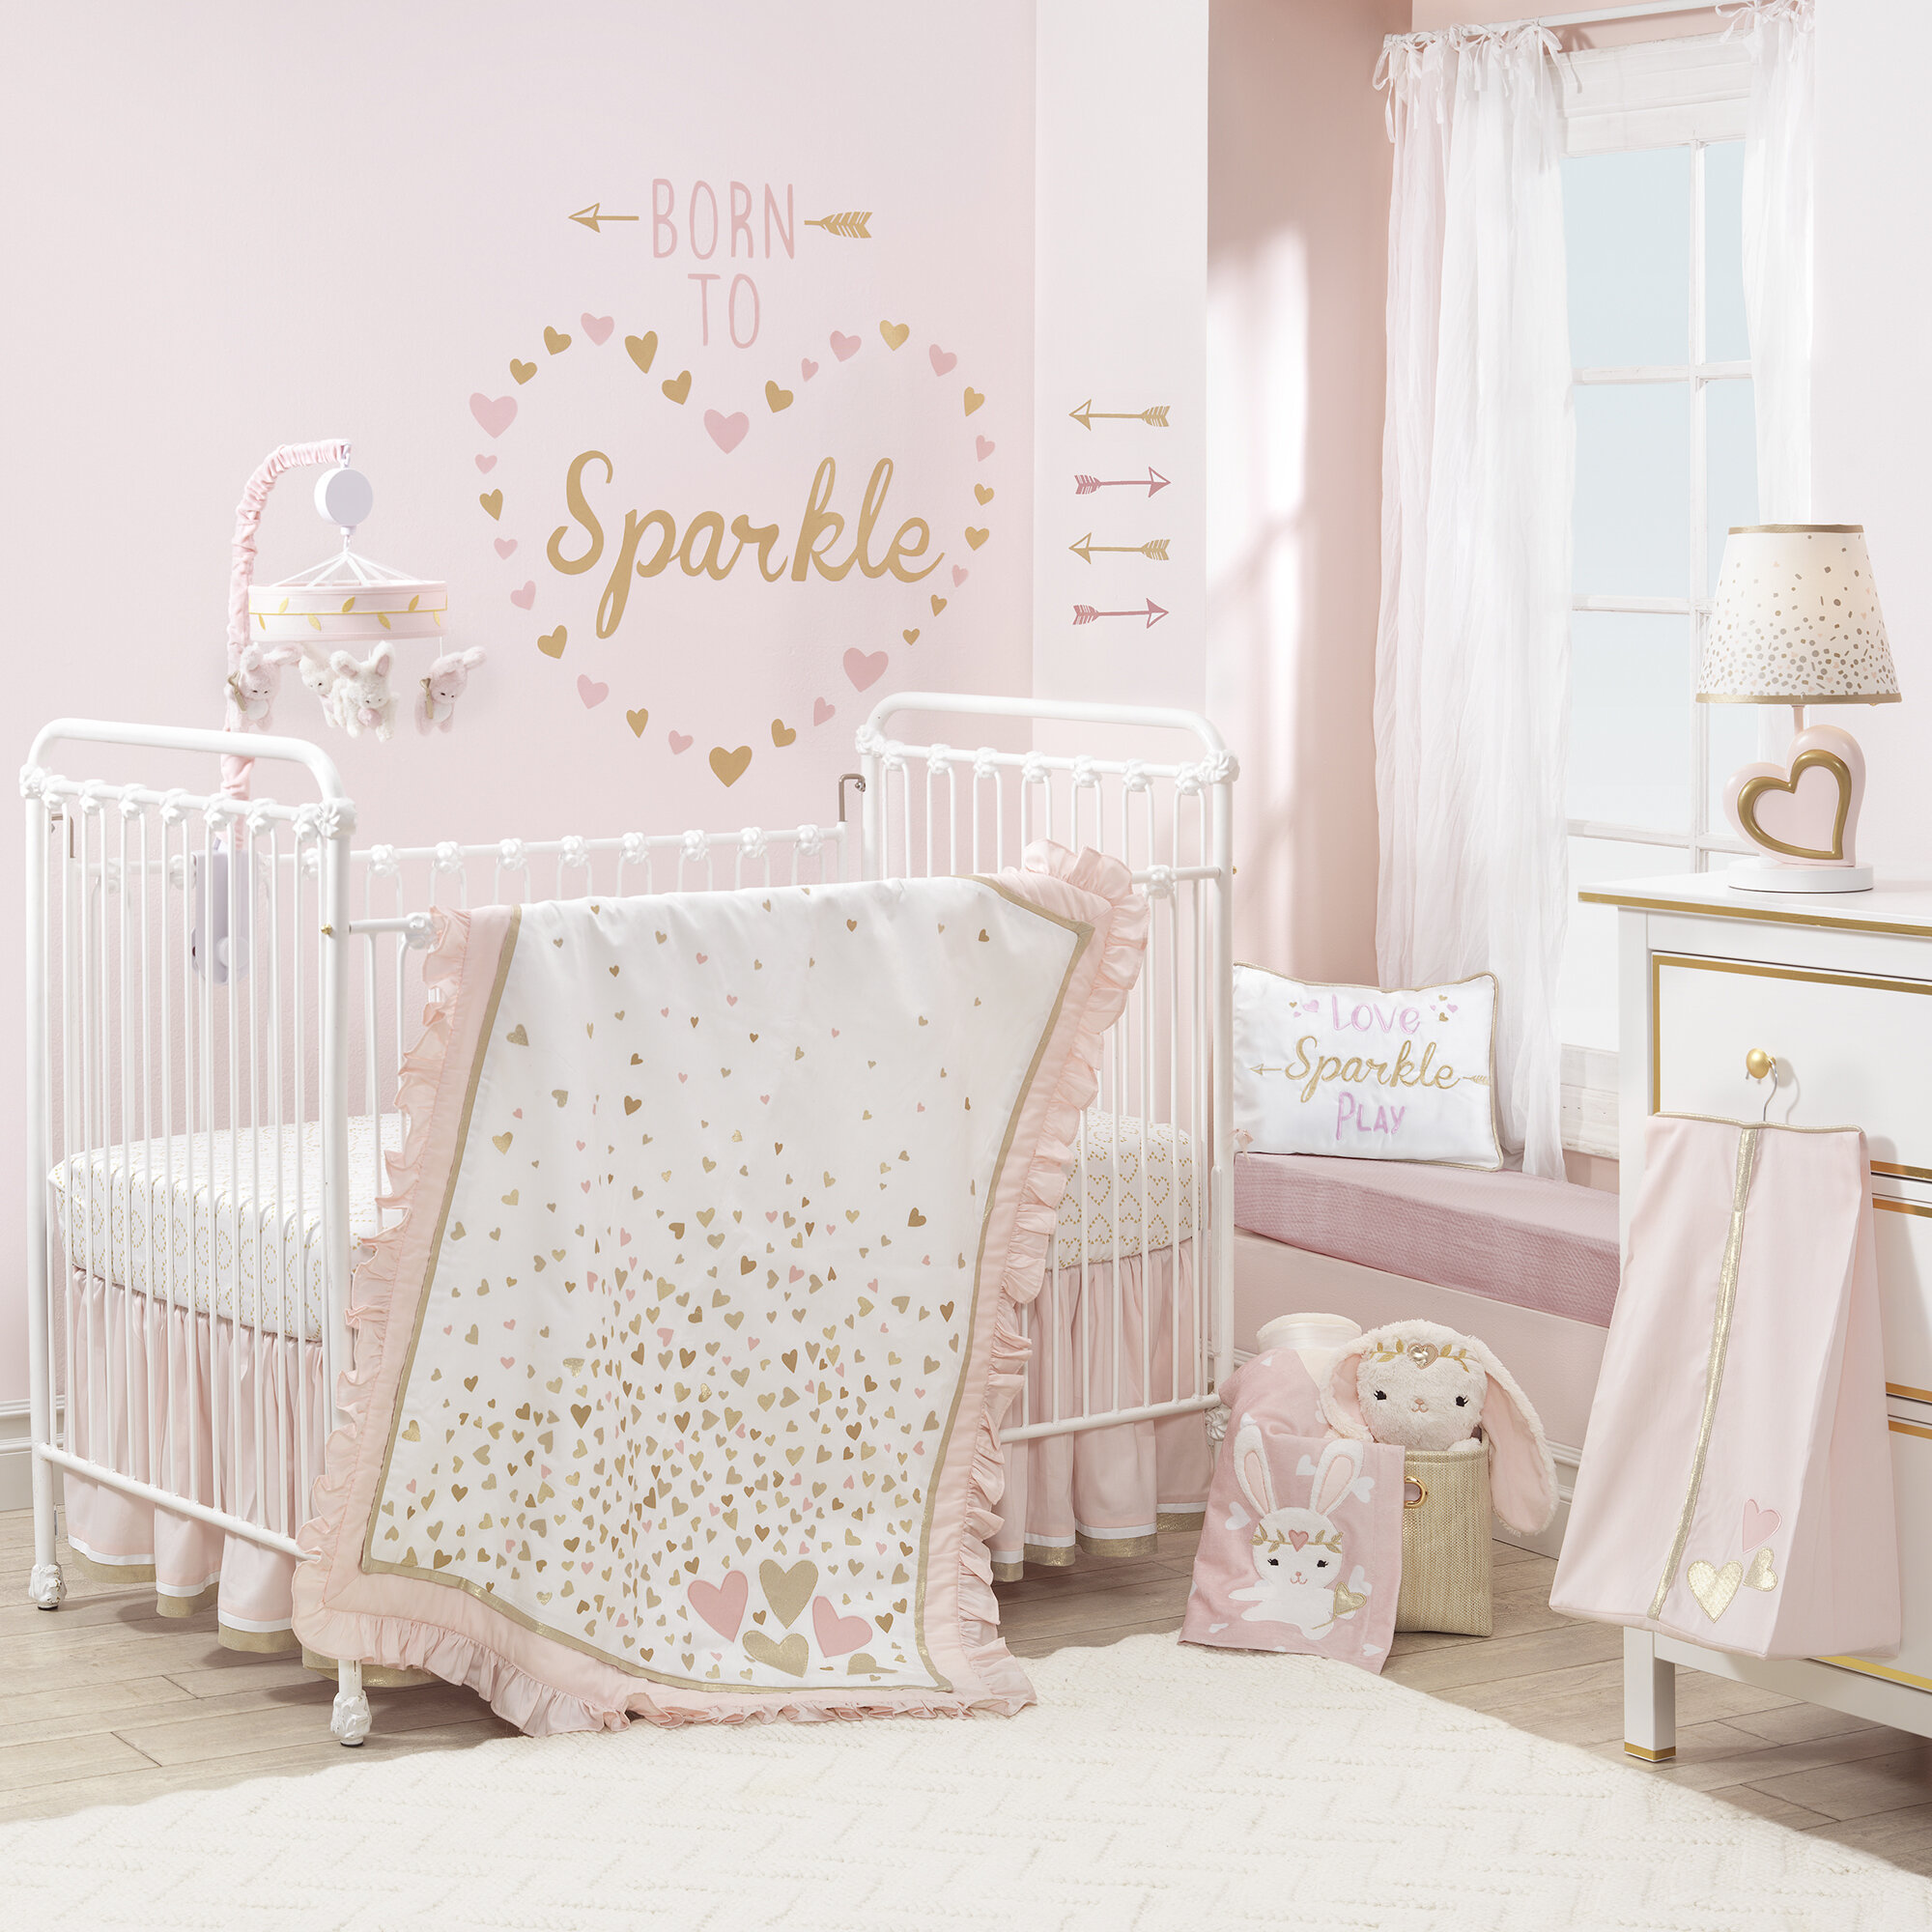 baby cot bed mobiles